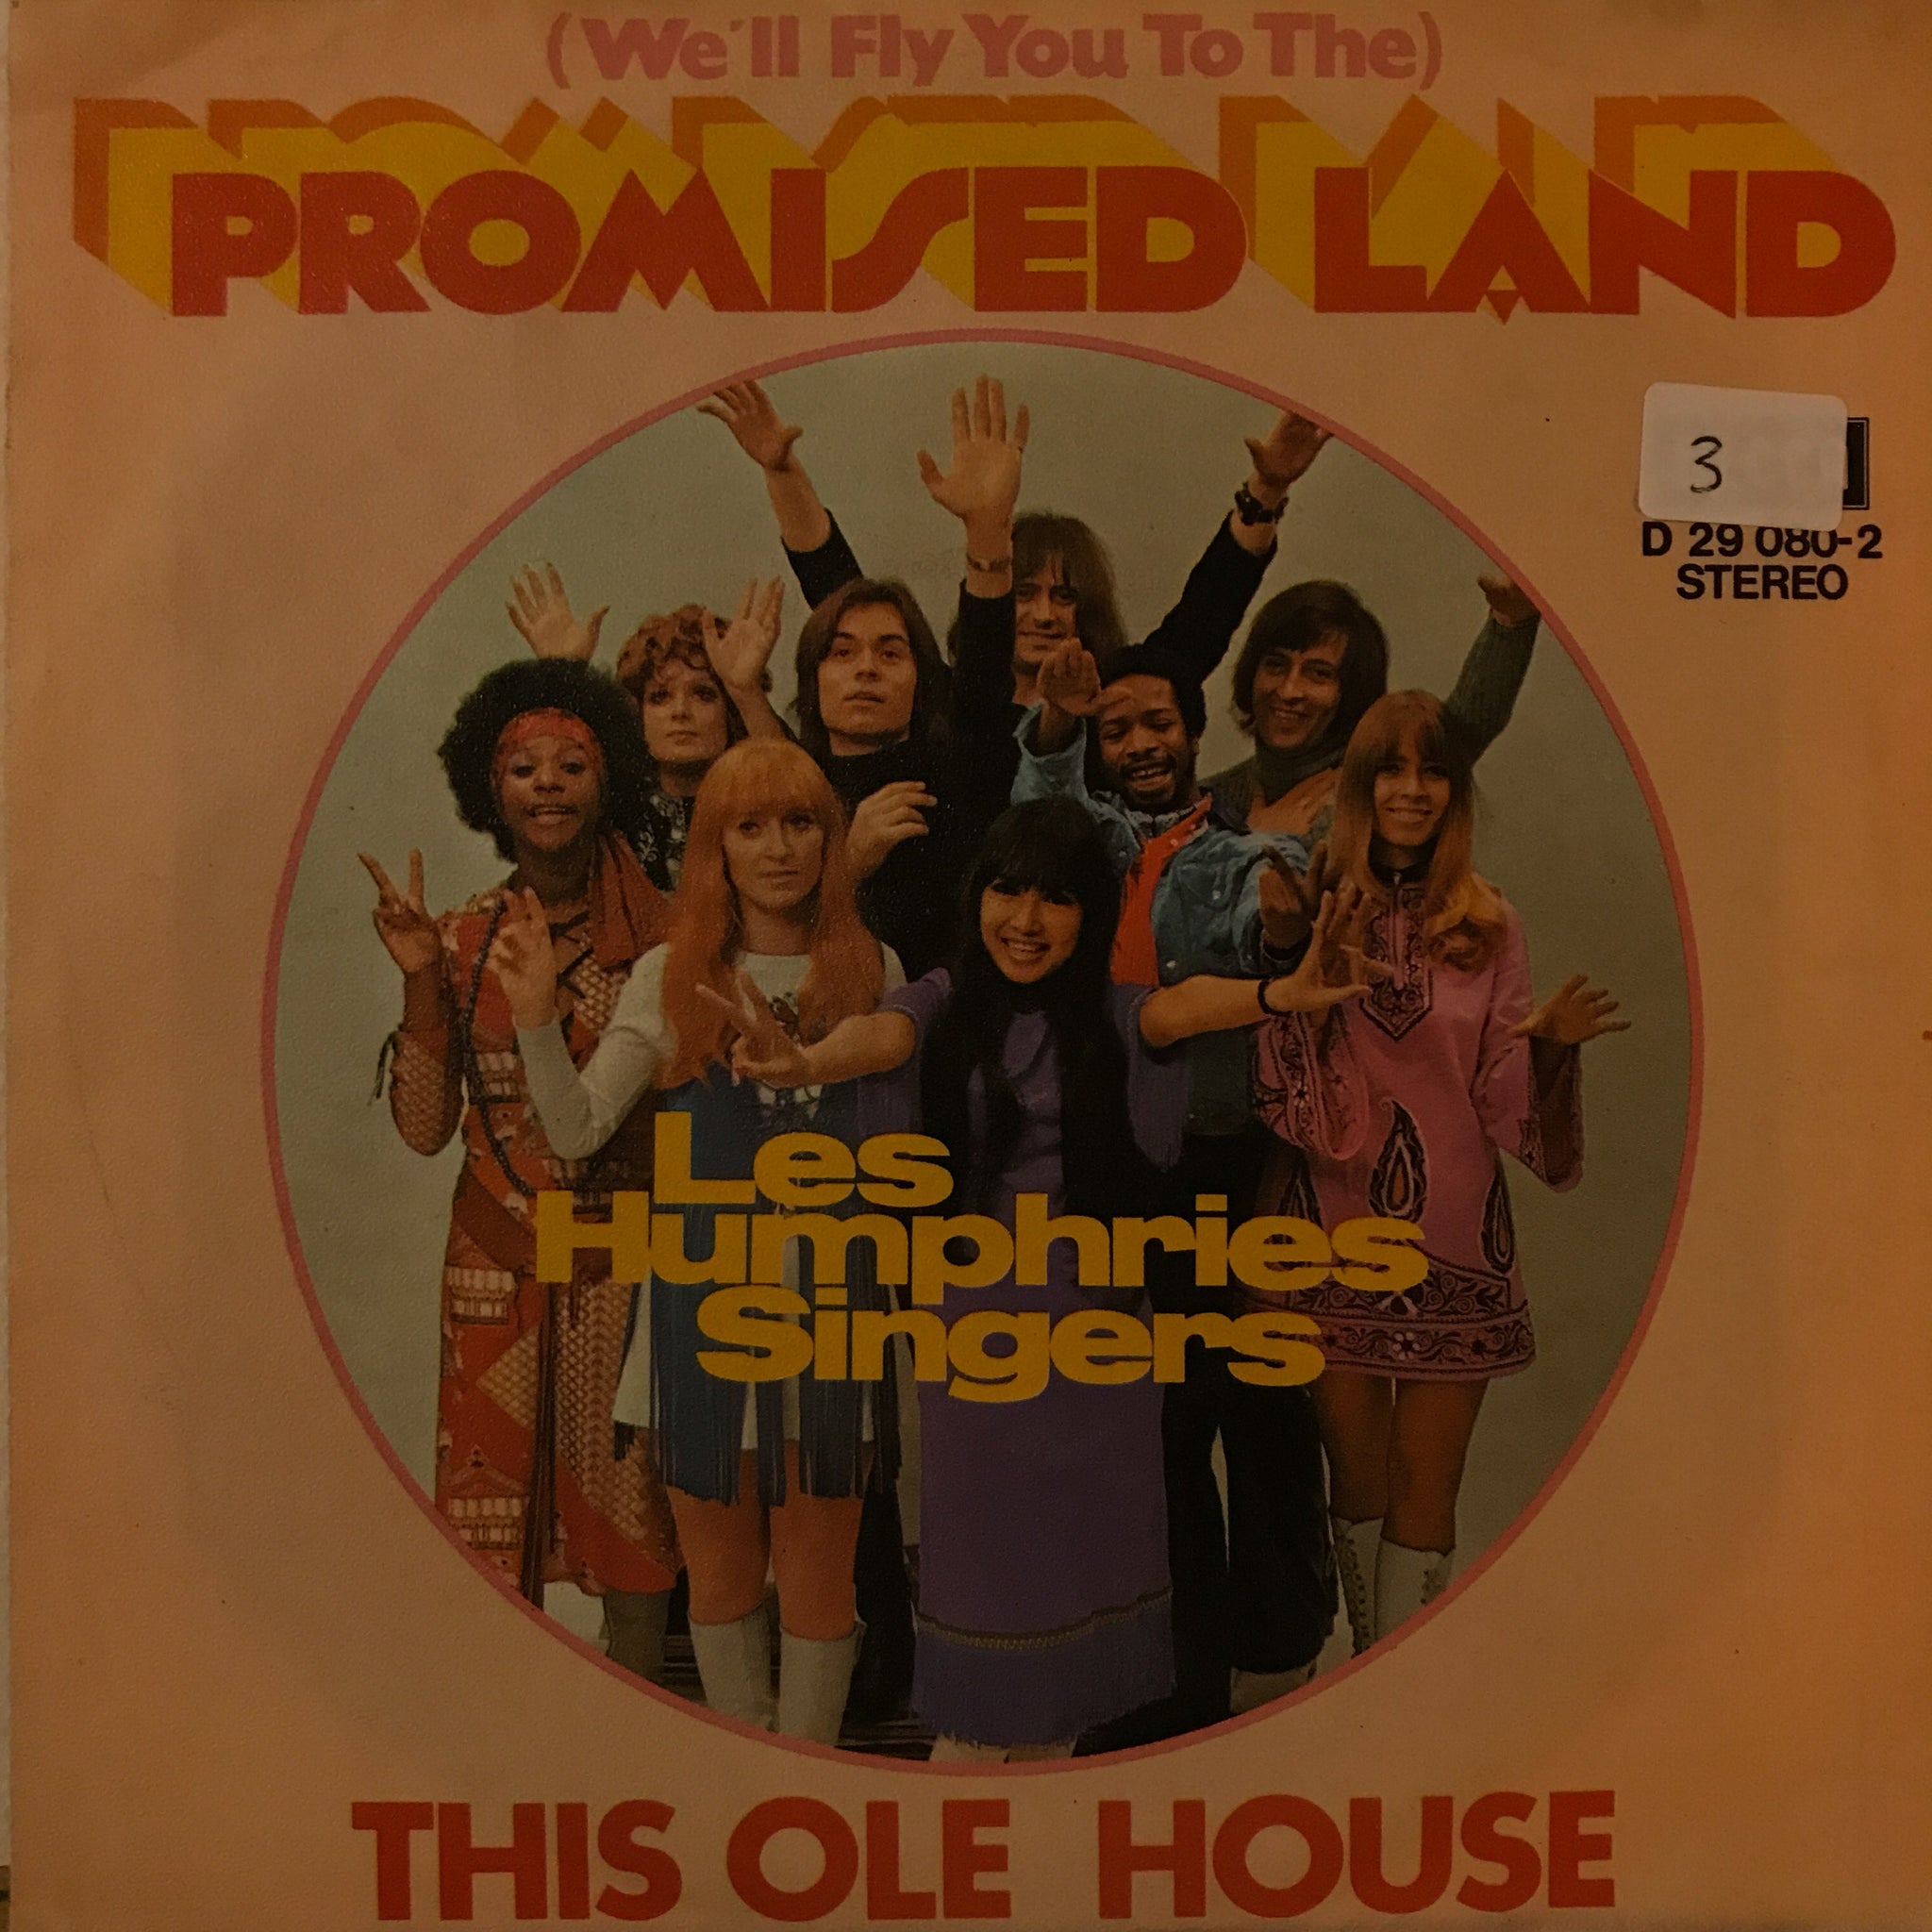 Les Humphries Singers ‎– (We'll Fly You To The) Promised Land / This Ole House